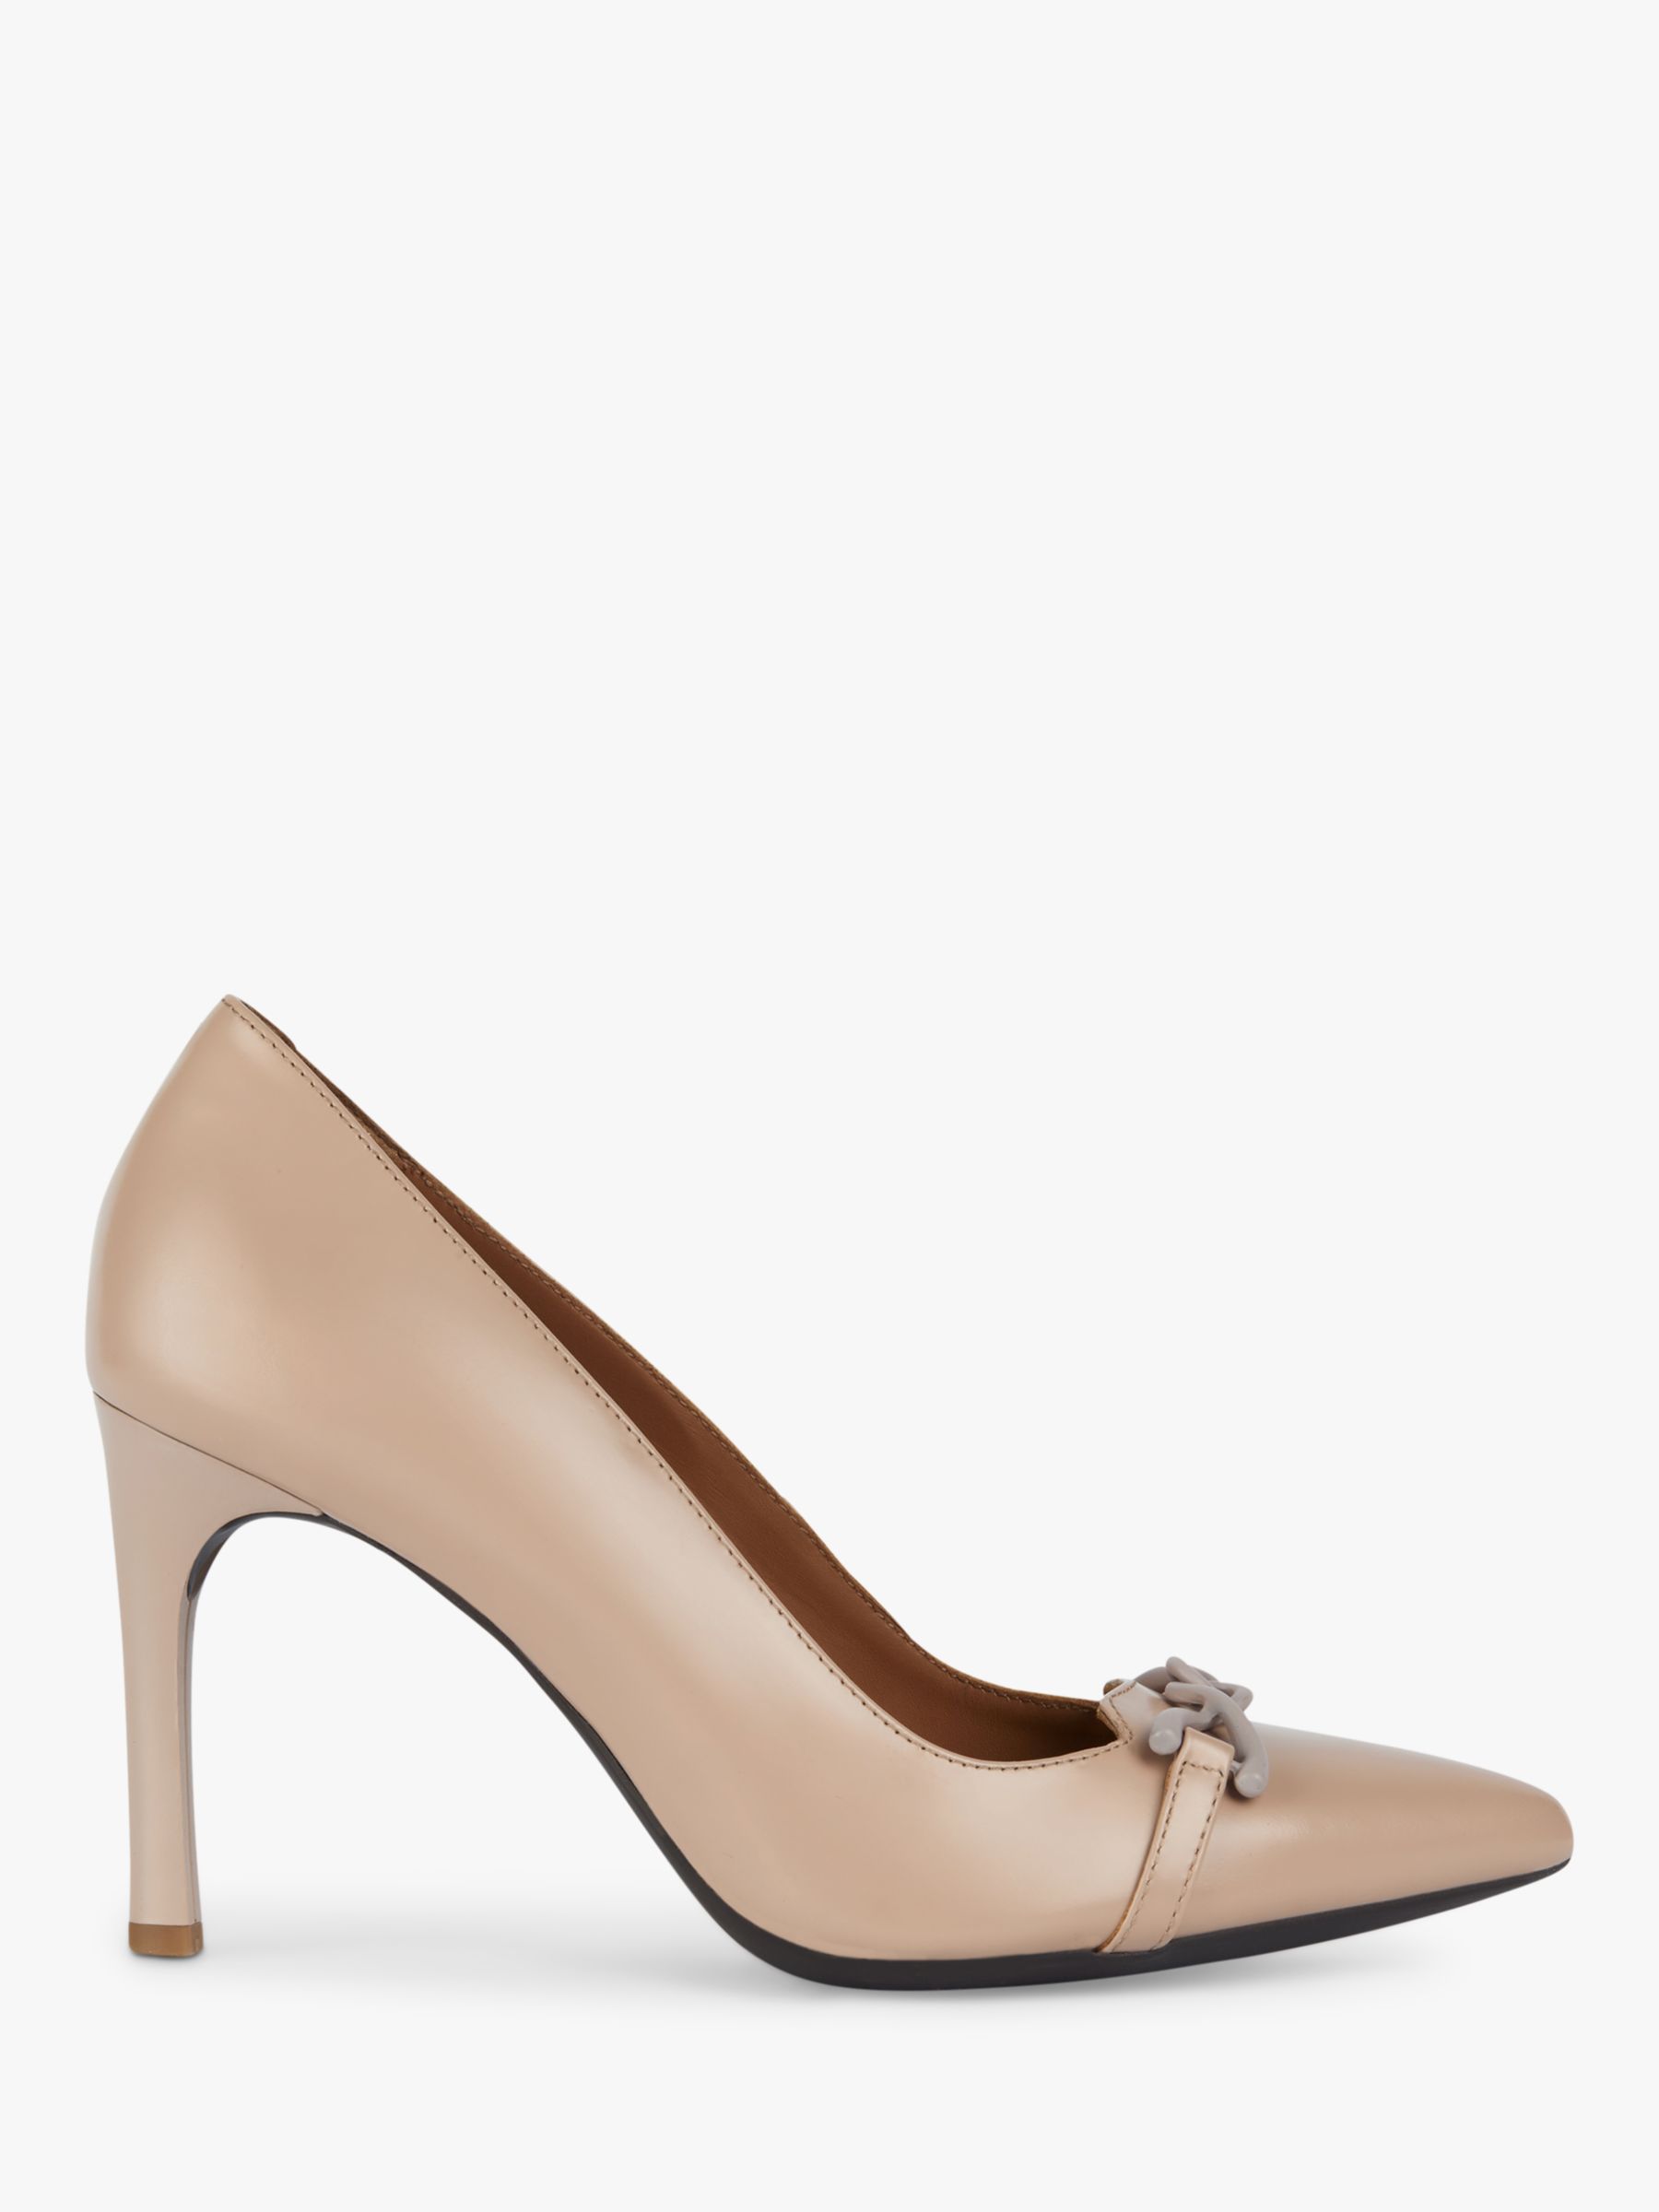 Geox Faviola High Leather Court Shoes, Nude at John Lewis & Partners